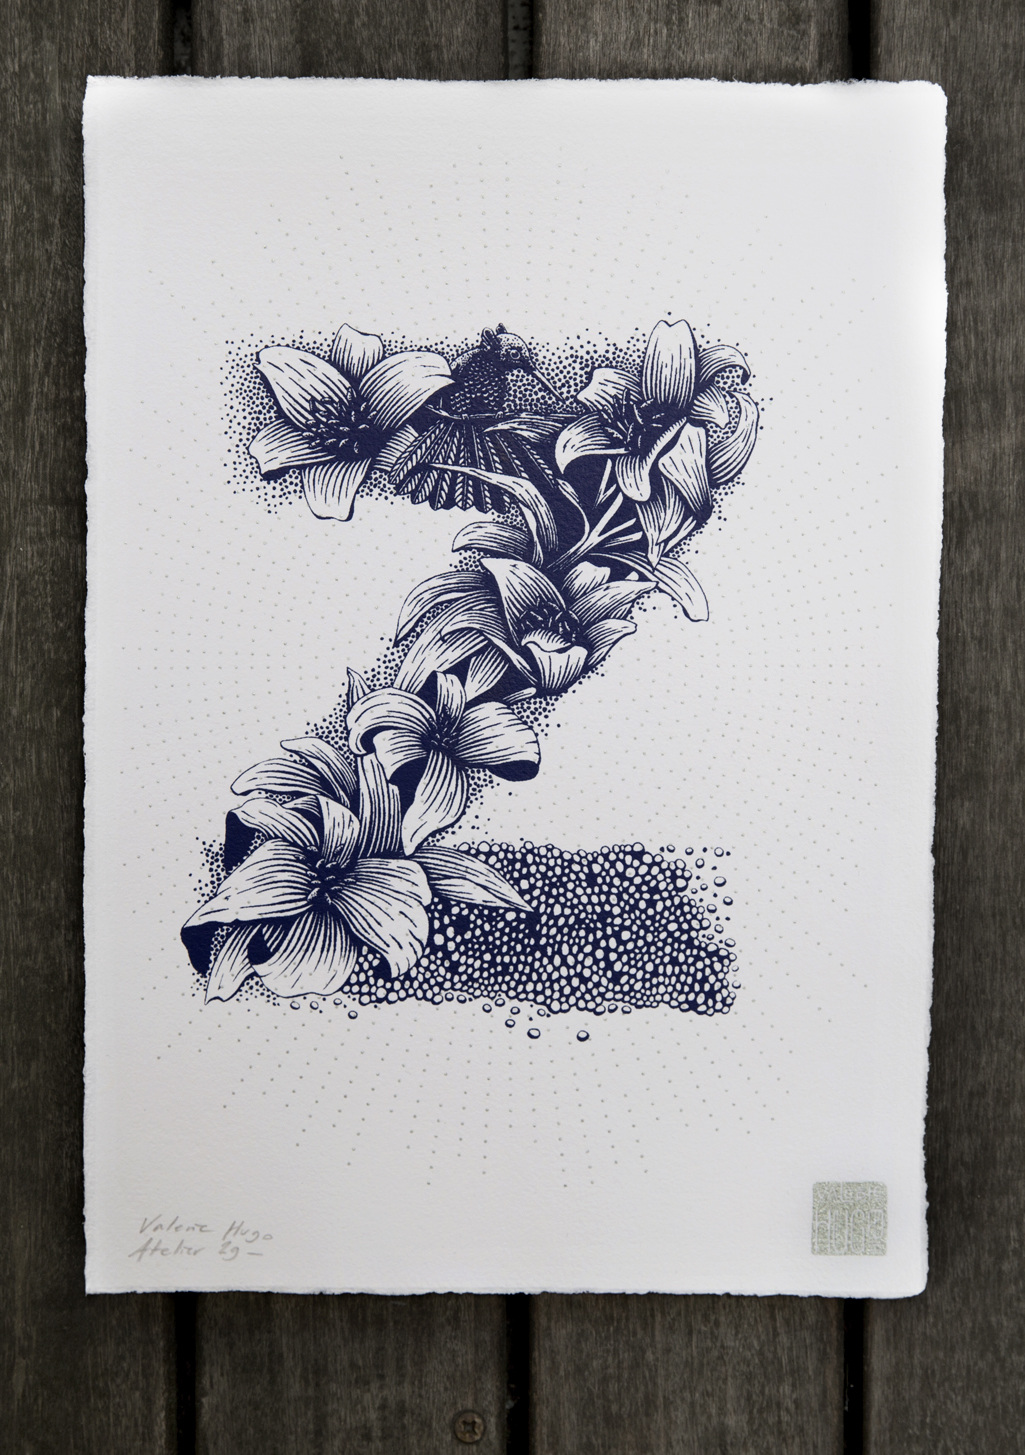 Nature Inspired Typography by Valérie Hugo